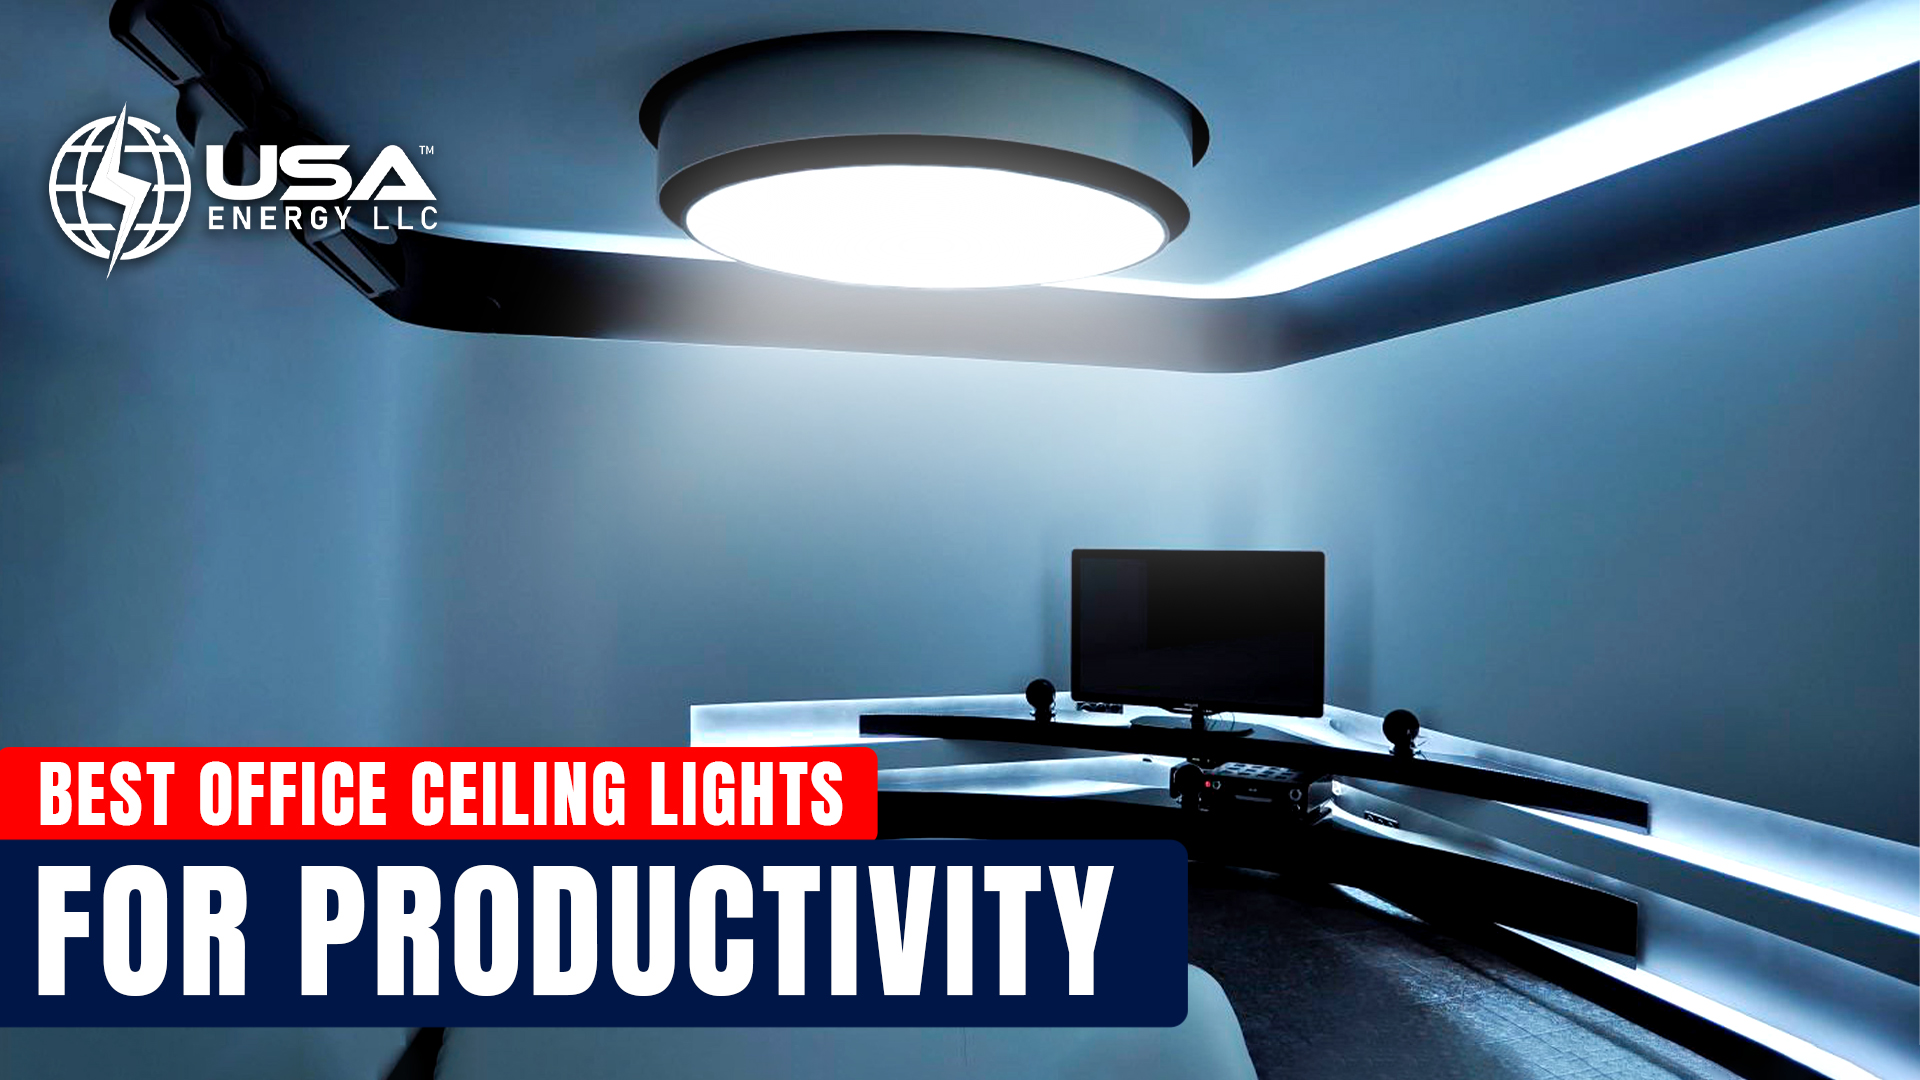 Best Office Ceiling Lights for Productivity